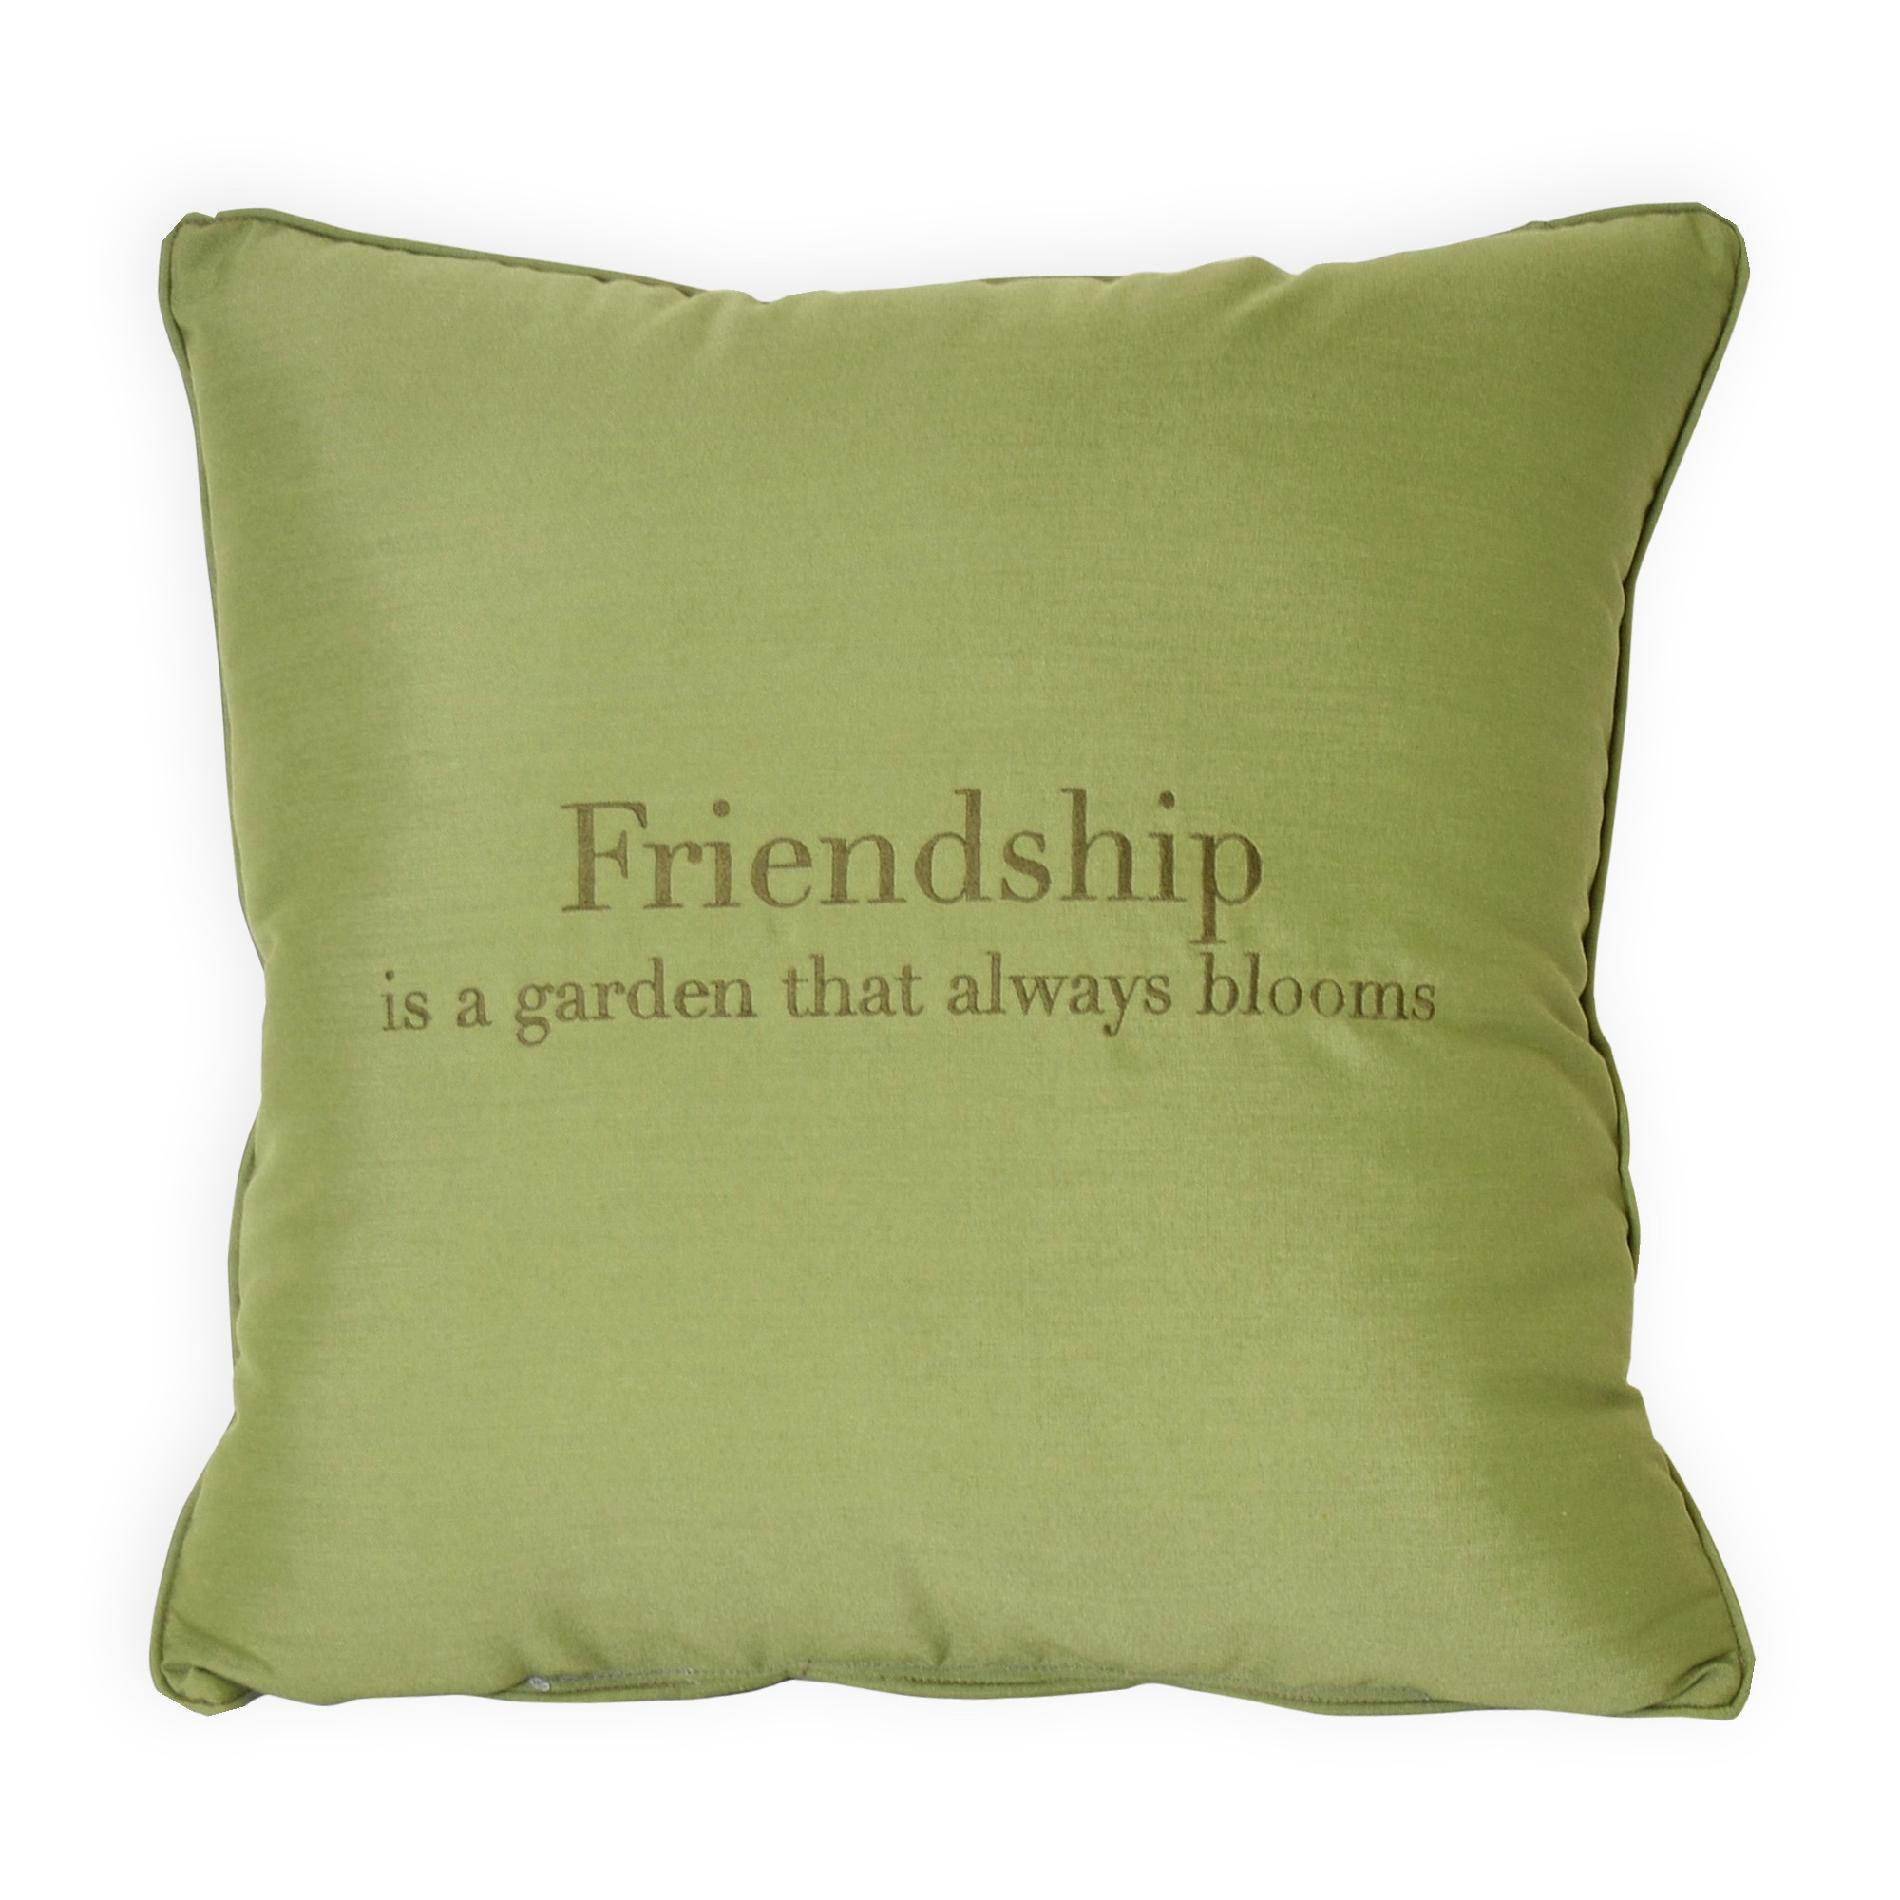 Deluxe (24") Embroidered Billboard Pillow - "Friendship is a garden that always blooms" - Color:  Spectrum Cilantro